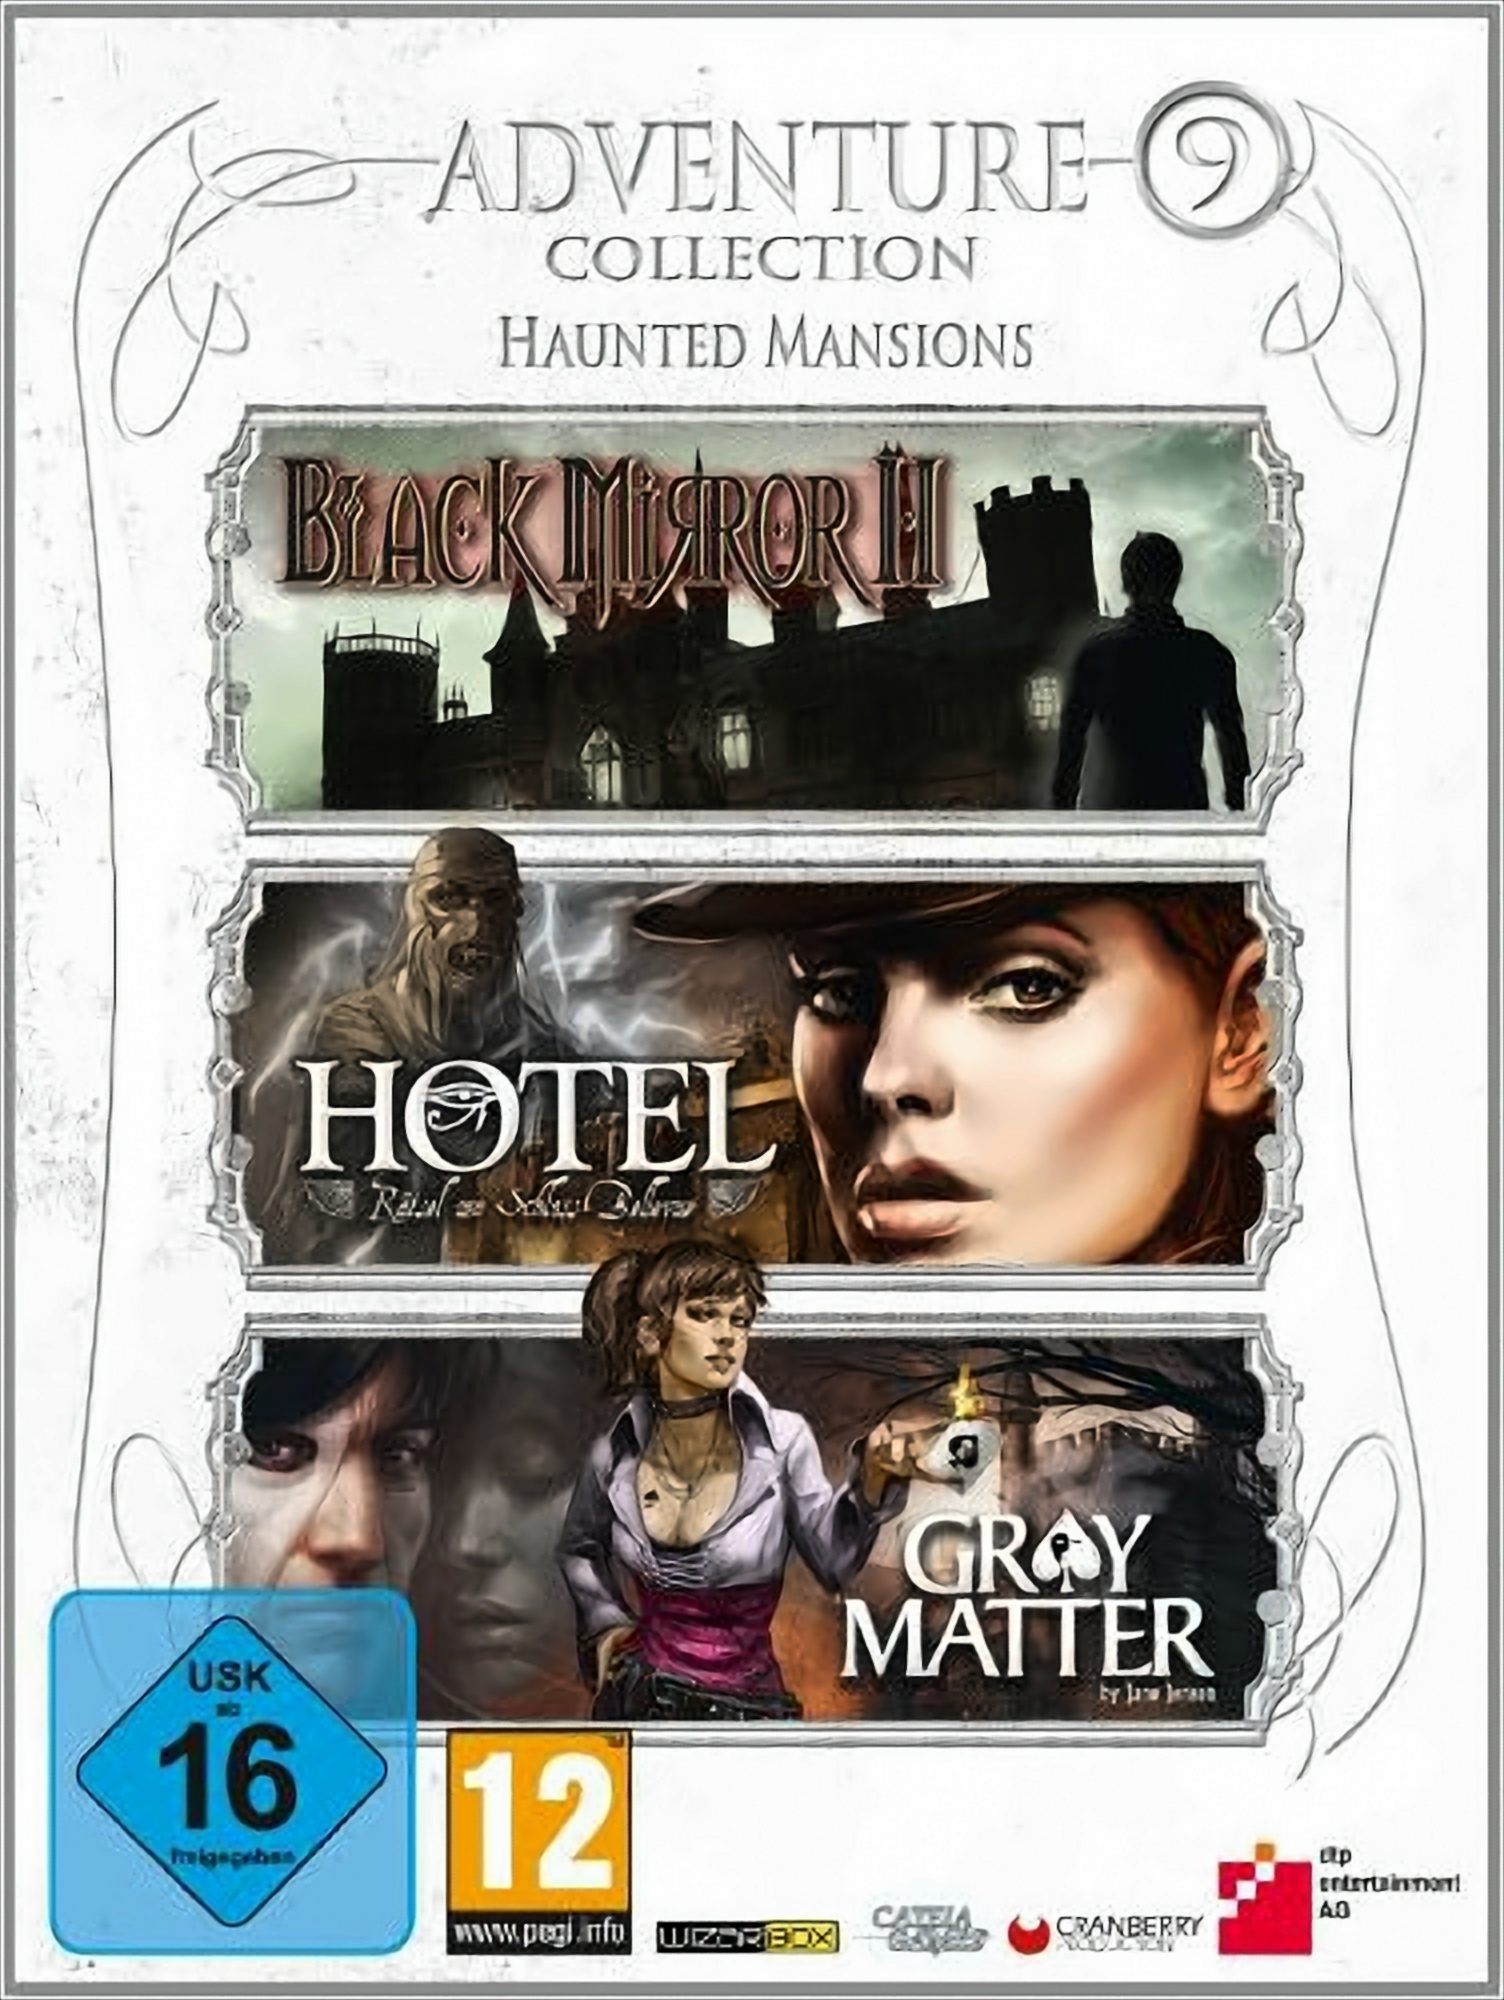 Adventure Collection 9 Mansions - Haunted [PC] 